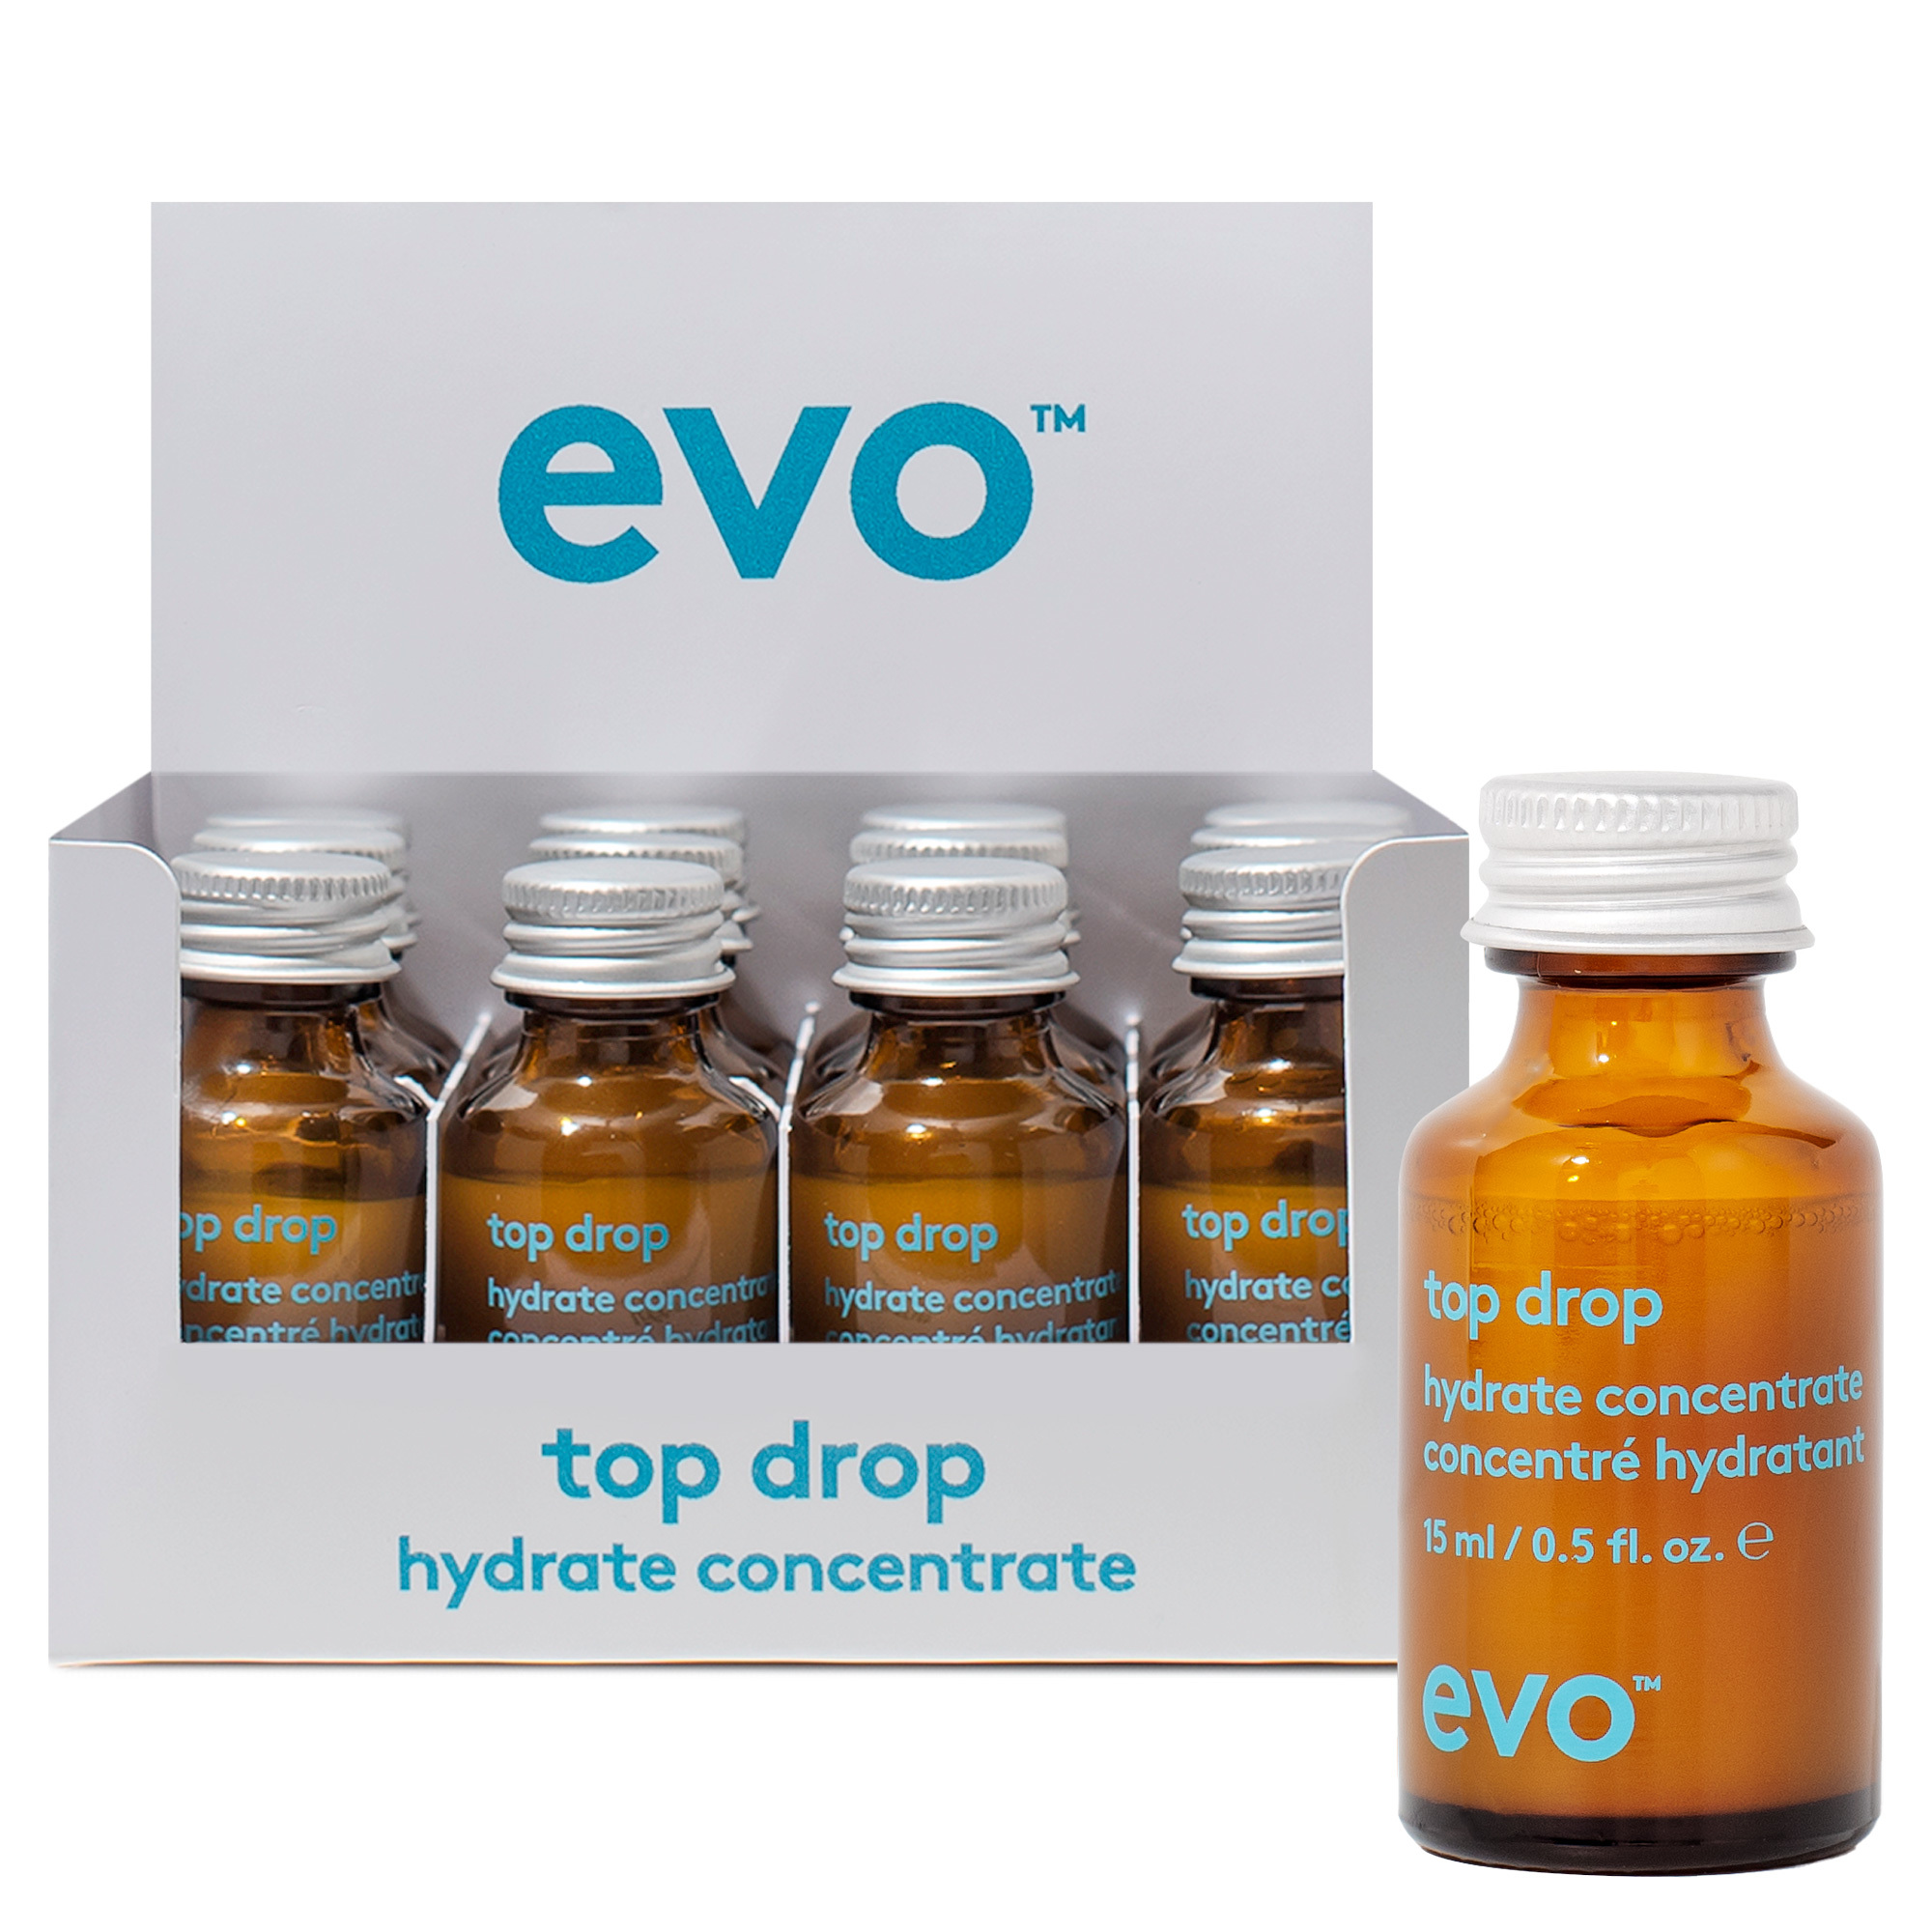 evo top drop hydrate concentrate - 12pk 15ml Vials